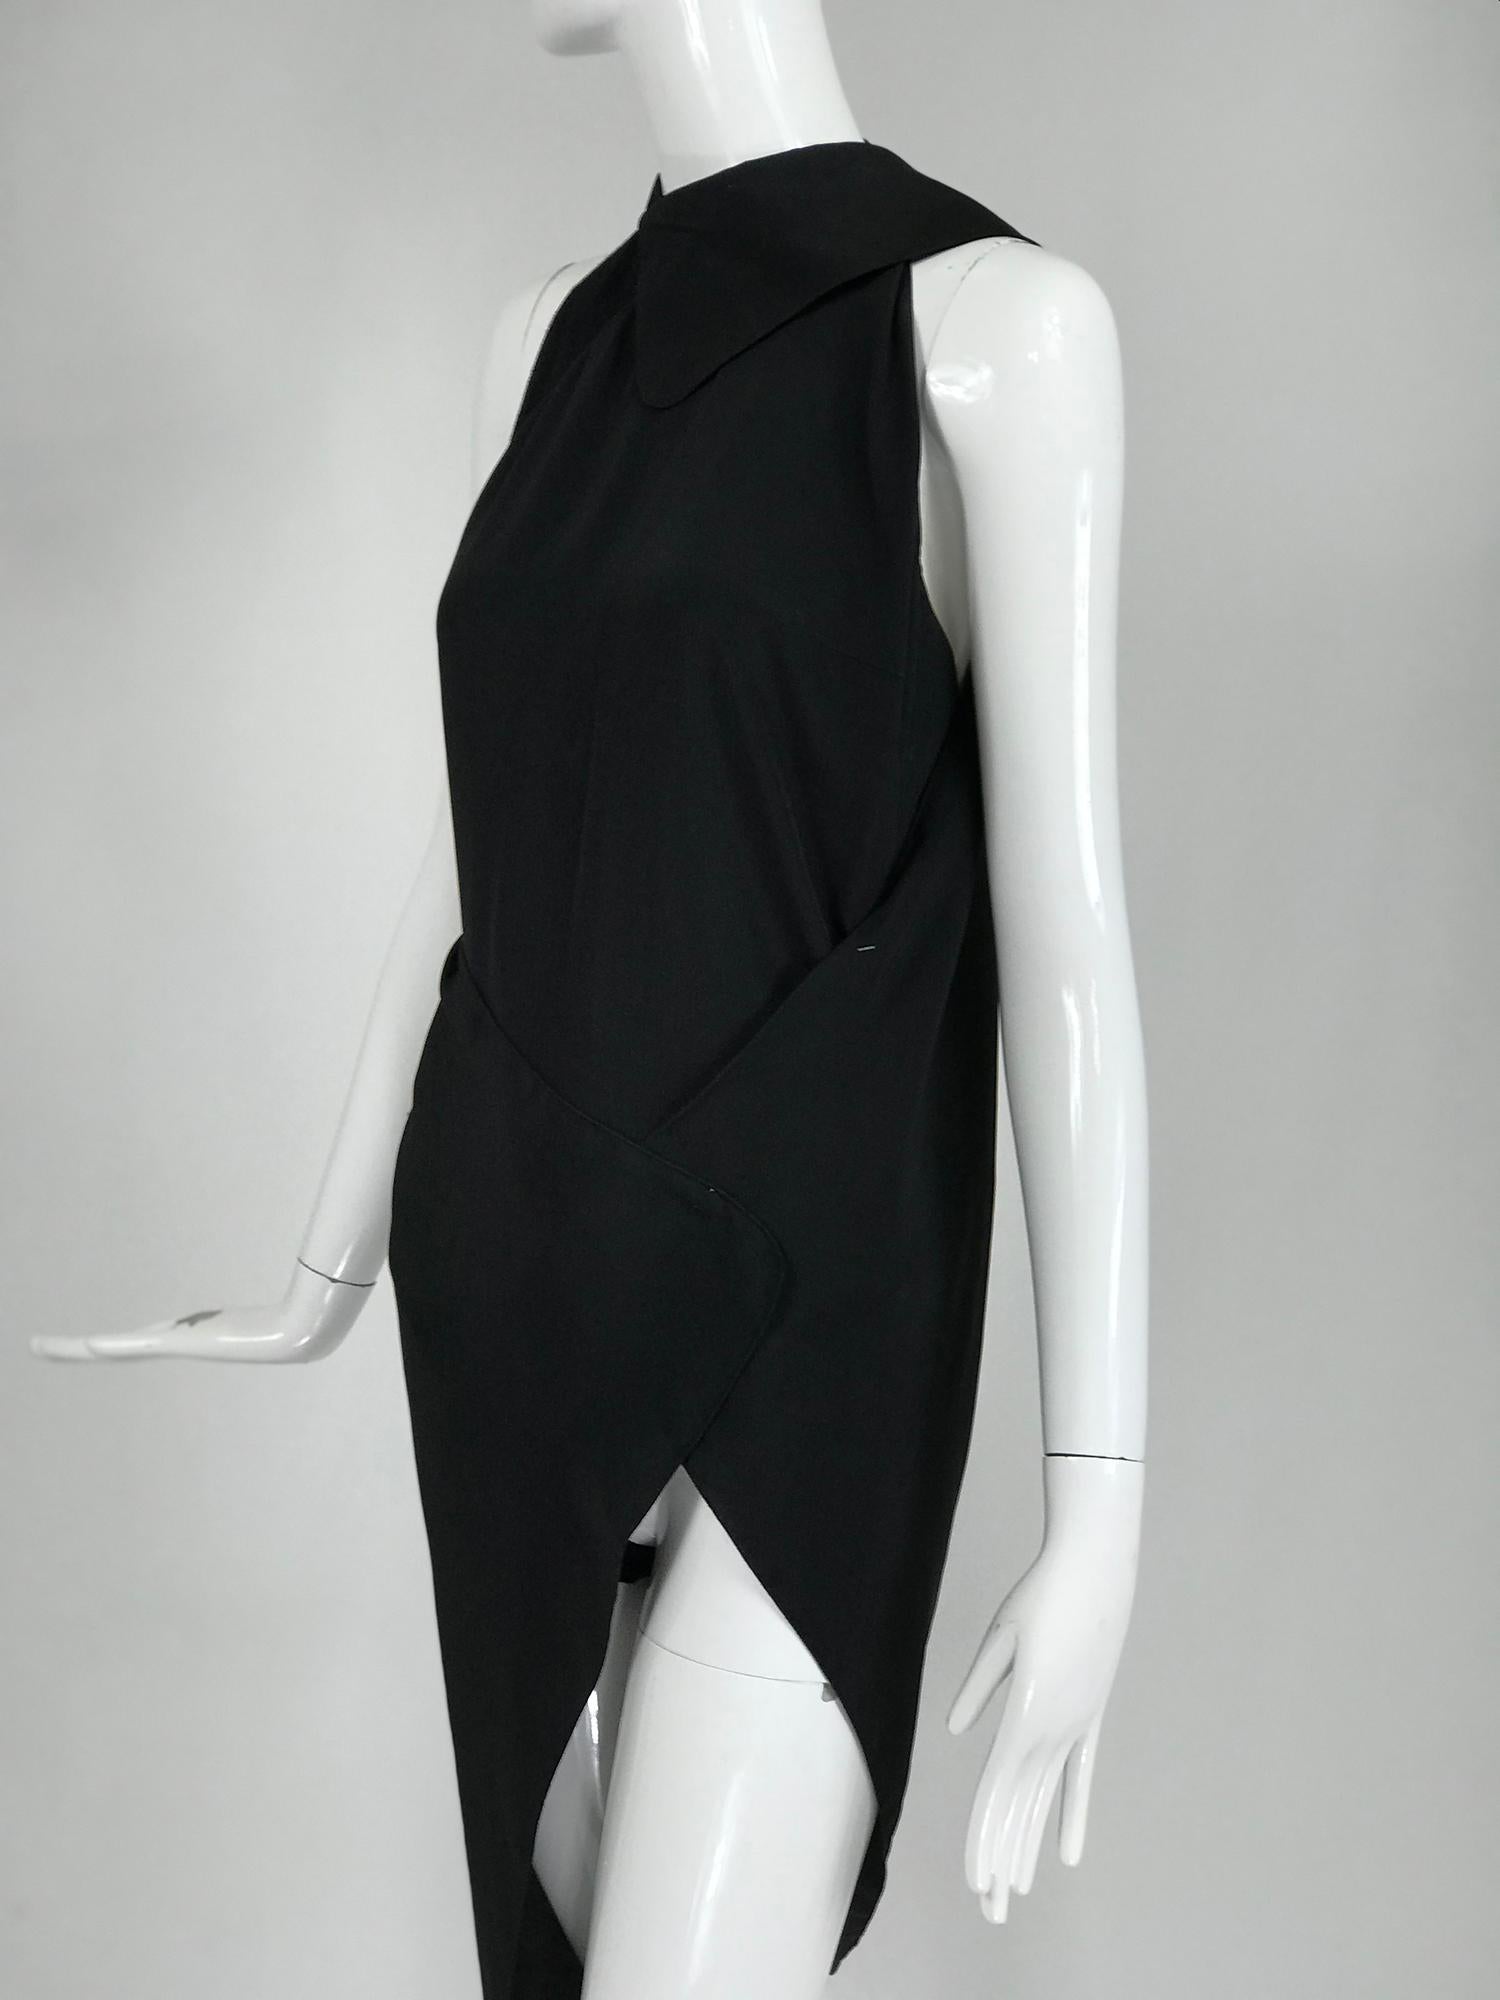 Gianfranco Ferre Black Silk and Sweater Knit Body Suit and Wrap or Drape 1980s For Sale 2